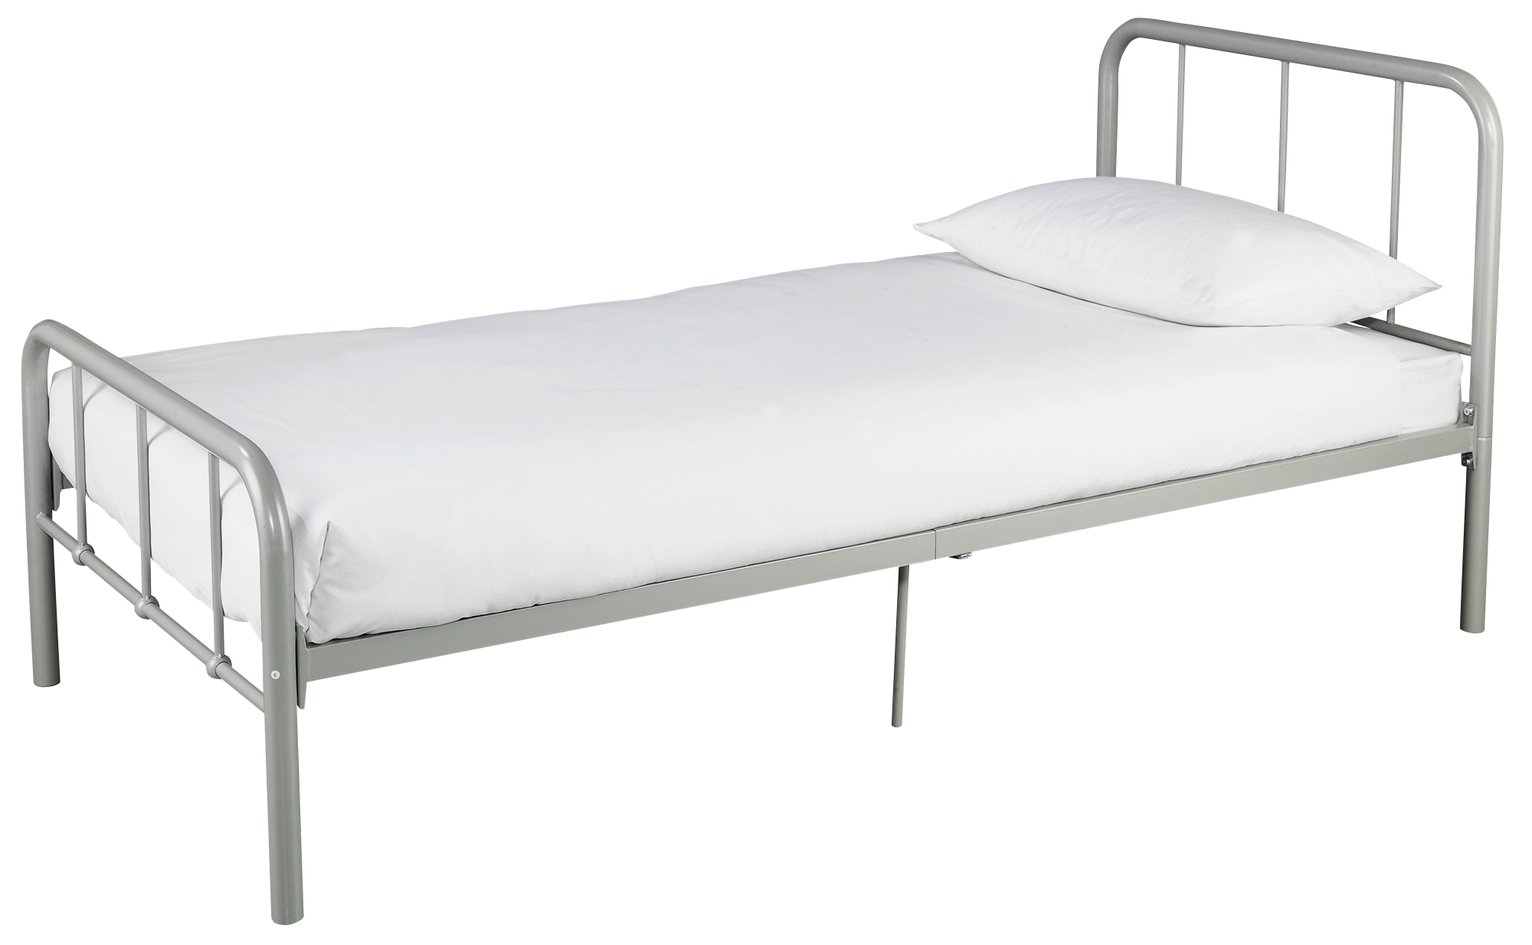 Argos Home Charlie Single Metal Bed Frame Review